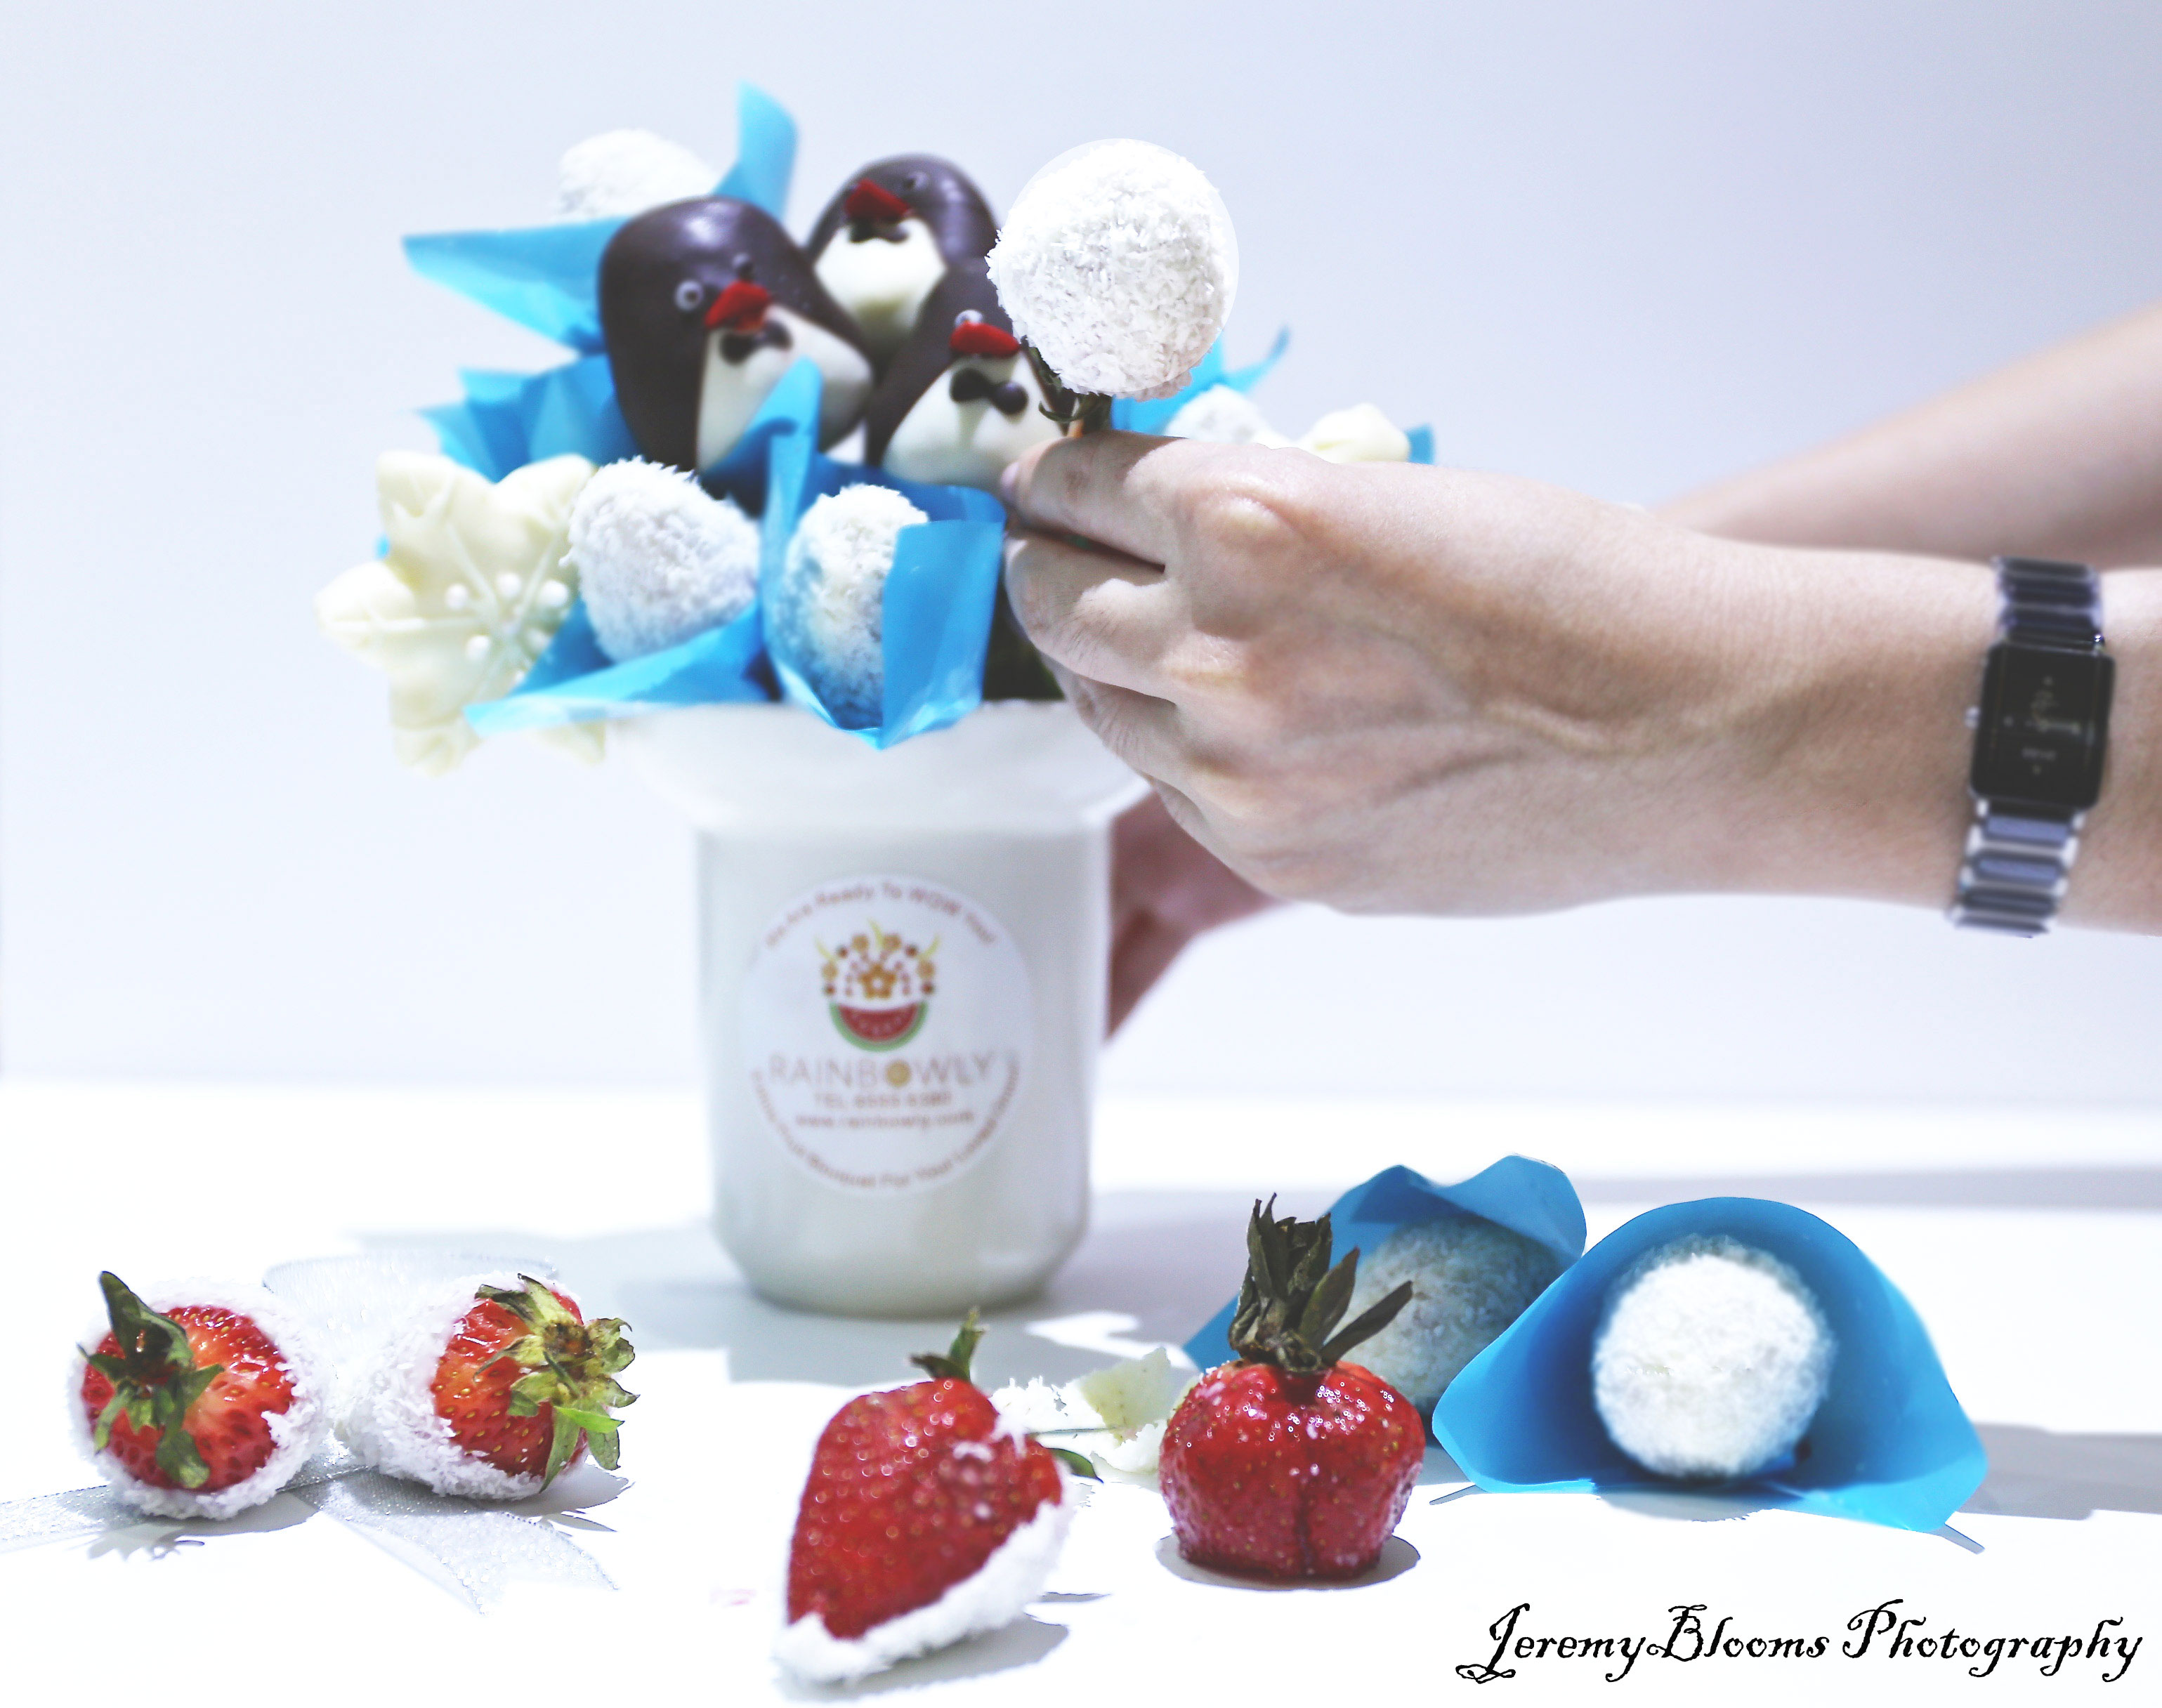 Rainbowly - One of The Best Fruit Bouquets Boutiques in Singapore - Alvinology